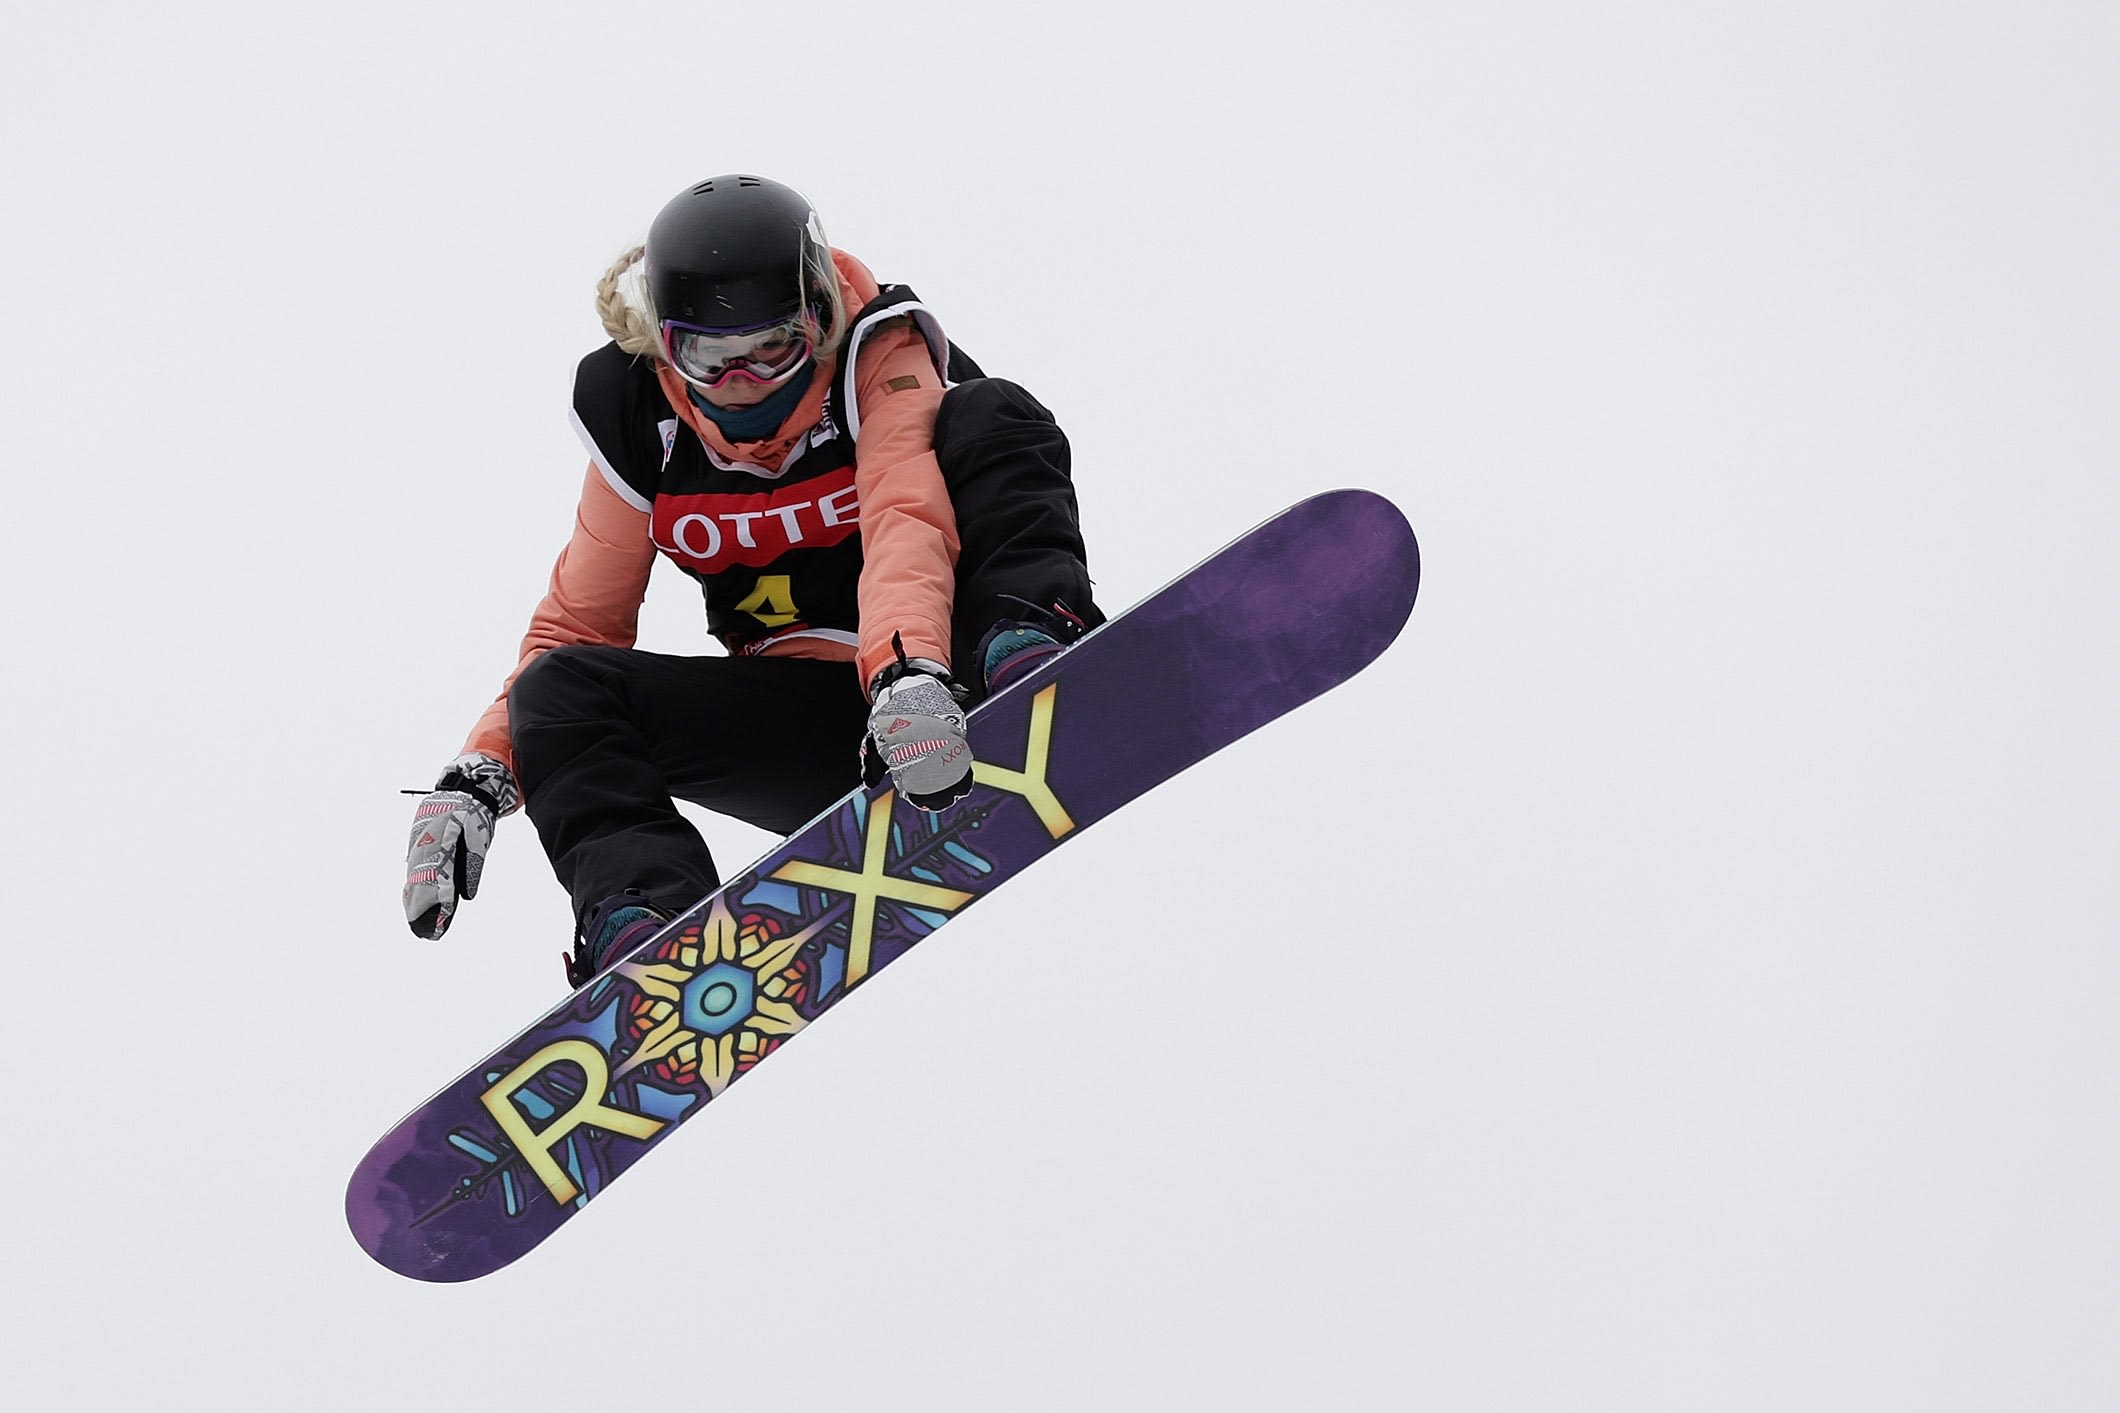 PYEONGCHANG, SOUTH KOREA  NOVEMBER 26:  Katie Ormerod of Great Britain competes in Ladies Semifinals R2 during the FIS Snowboard World Cup 2016/17 at Alpensia Ski Jumping Center on November 26, 2016 in Pyeongchang, South Korea  